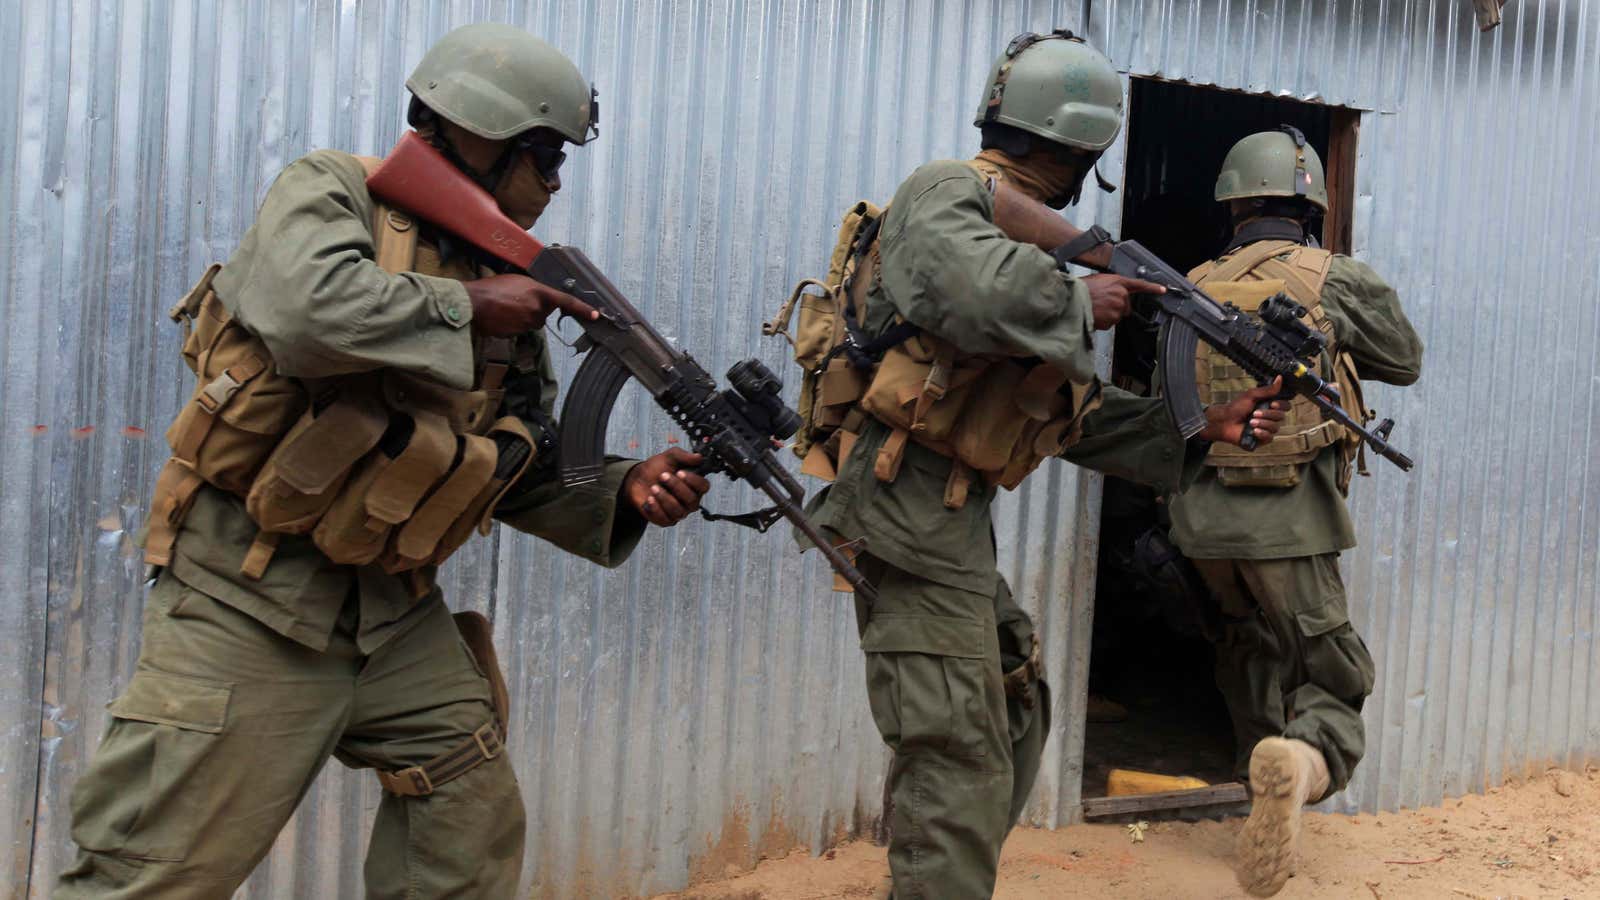 Somali government security forces hunt for al-Shabaab suspects.